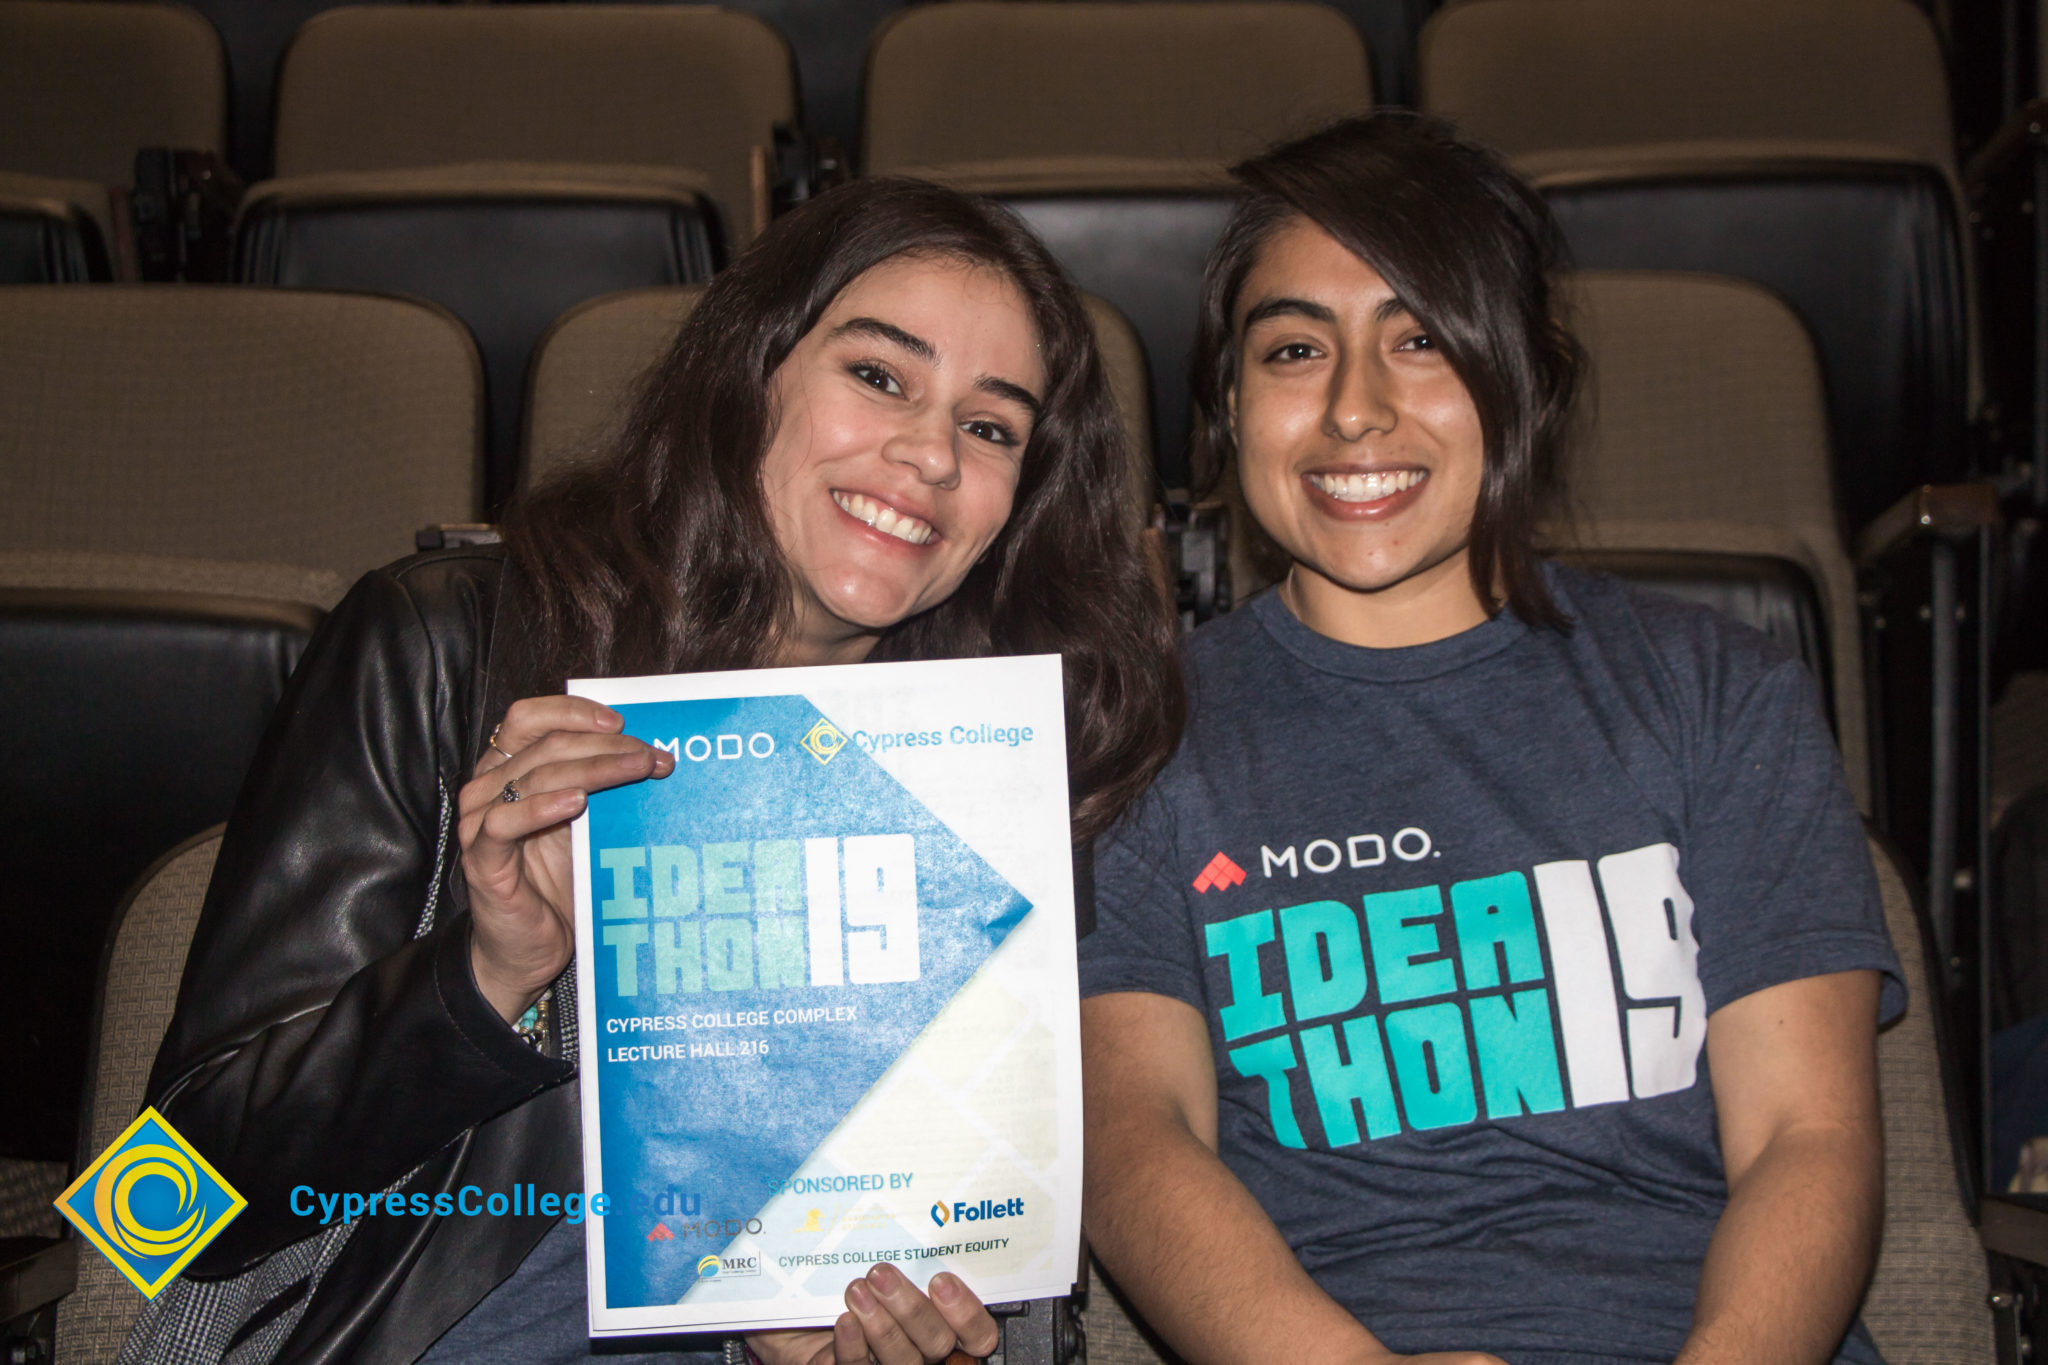 Two young ladies smiling and holding the Modo Ideathon19 flyer.